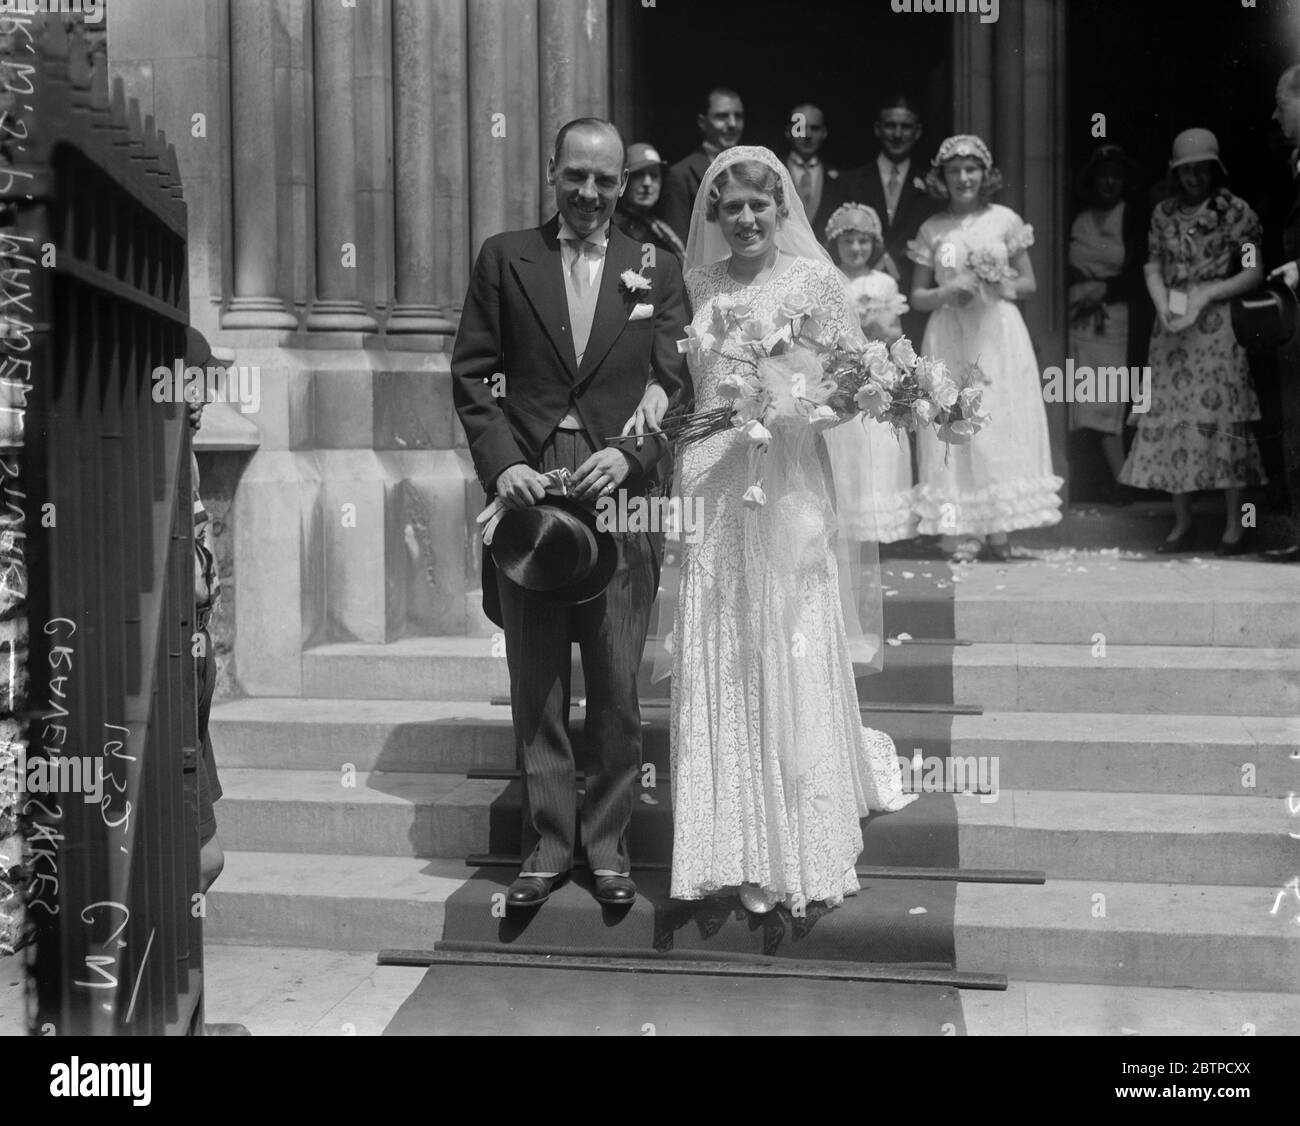 A society wedding . The marriage between Mr W J P Maxwell Stuart and Miss Ruth Craven Sykes took place at St James 's , Spanish Place . The bride and bridegroom . 7 July 1932 Stock Photo